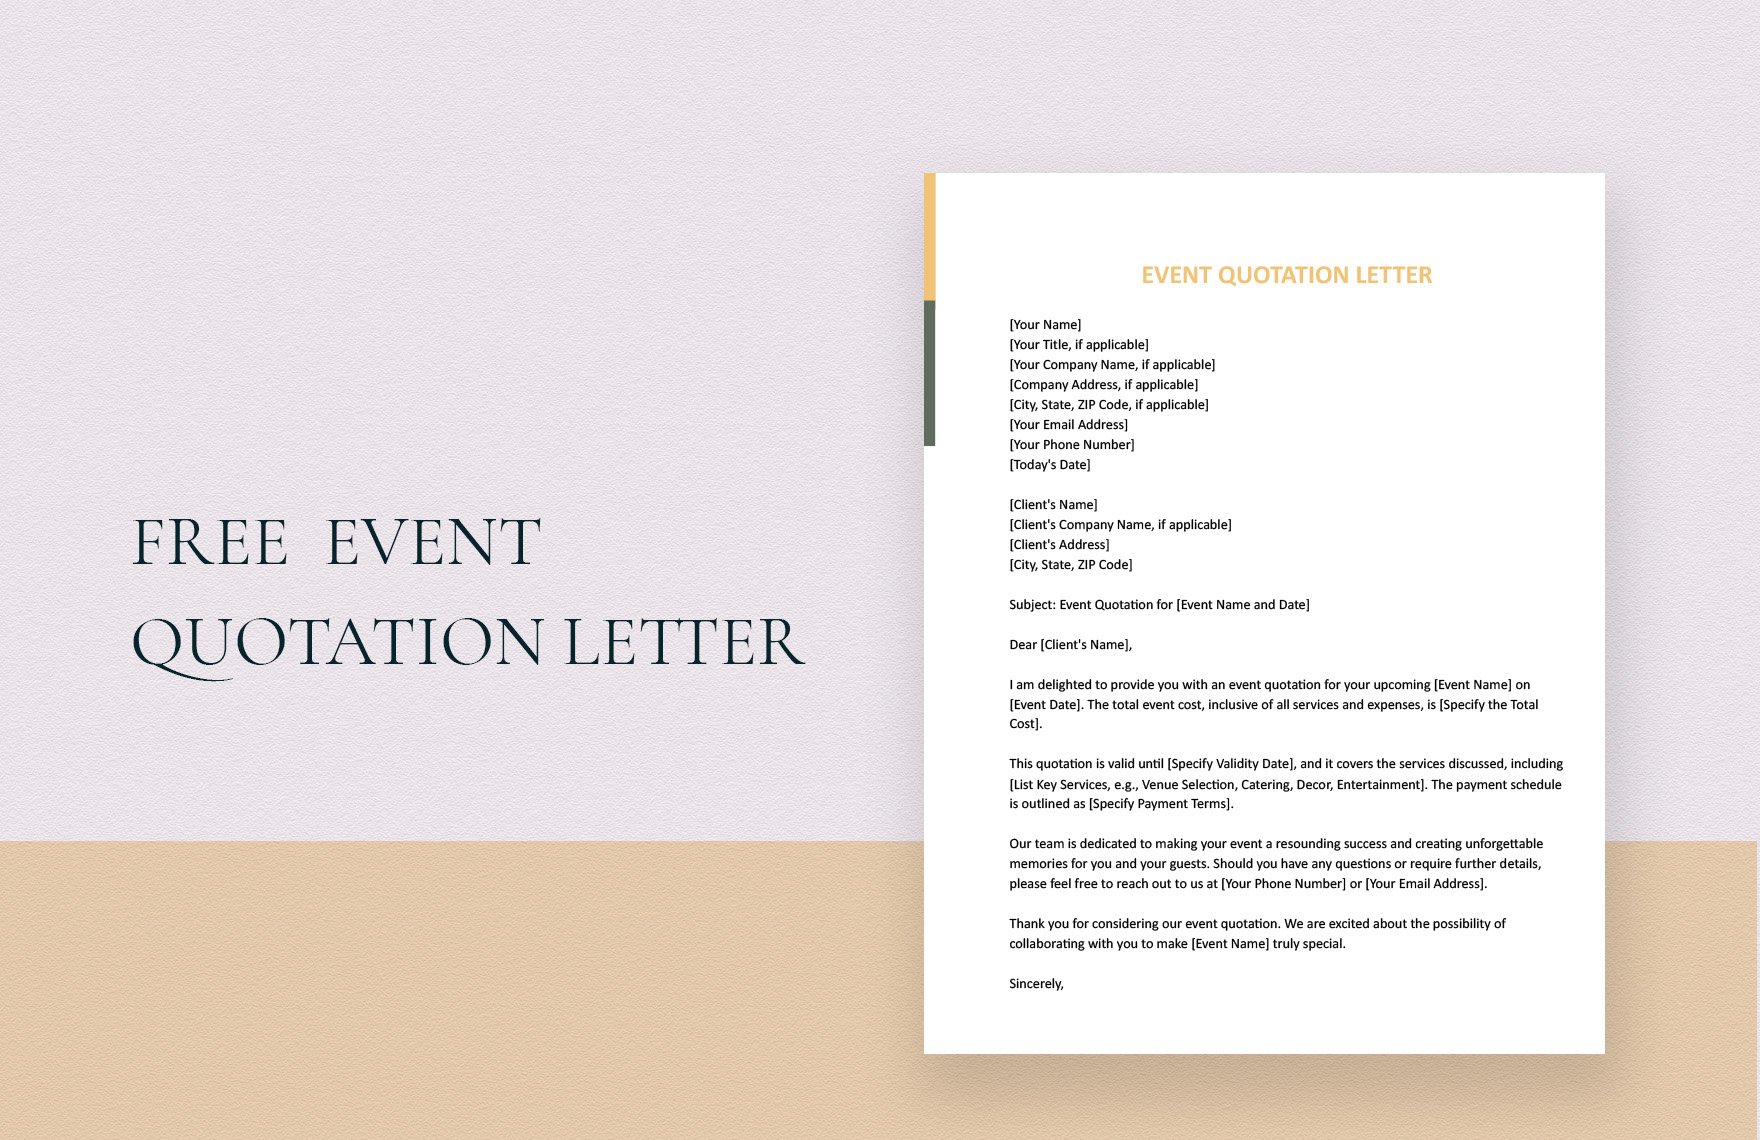 Event Quotation Letter in Word, Google Docs